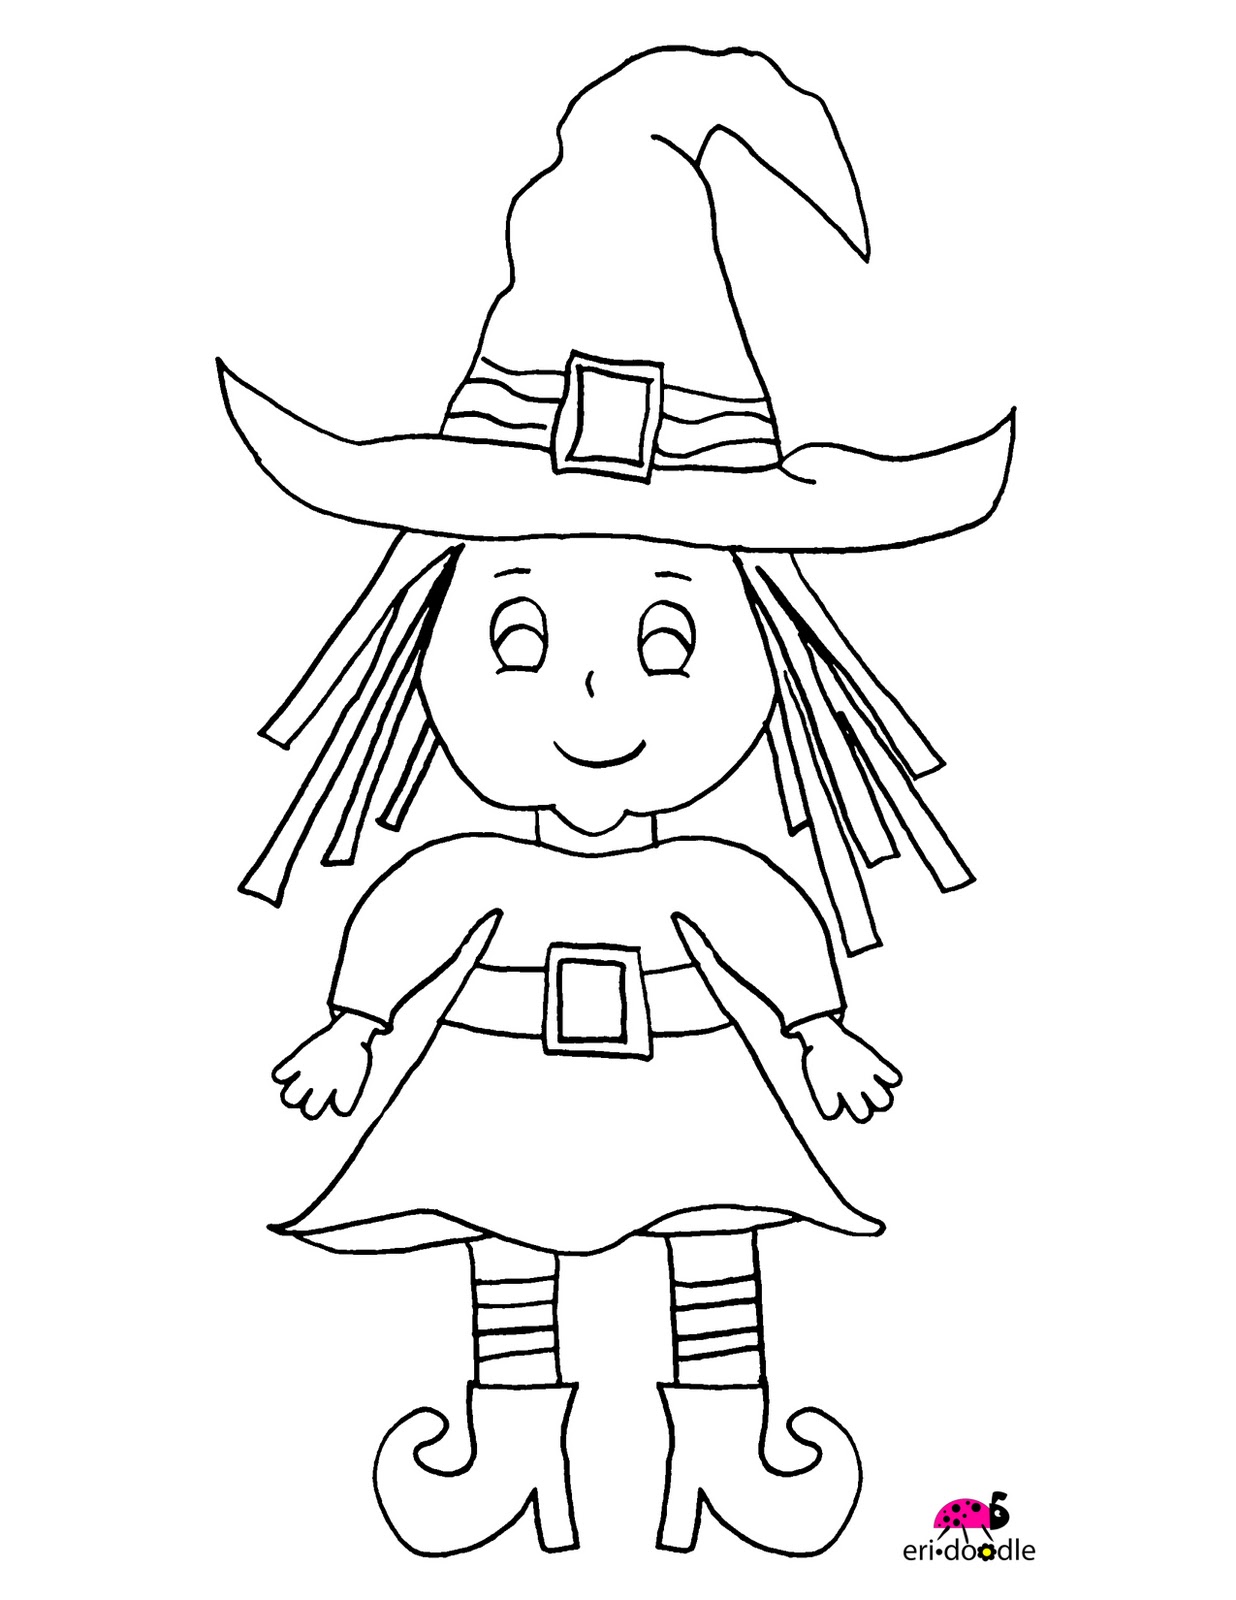 Download eridoodle designs and creations: What good is a cauldron without a witch? Lets digi stamp one.